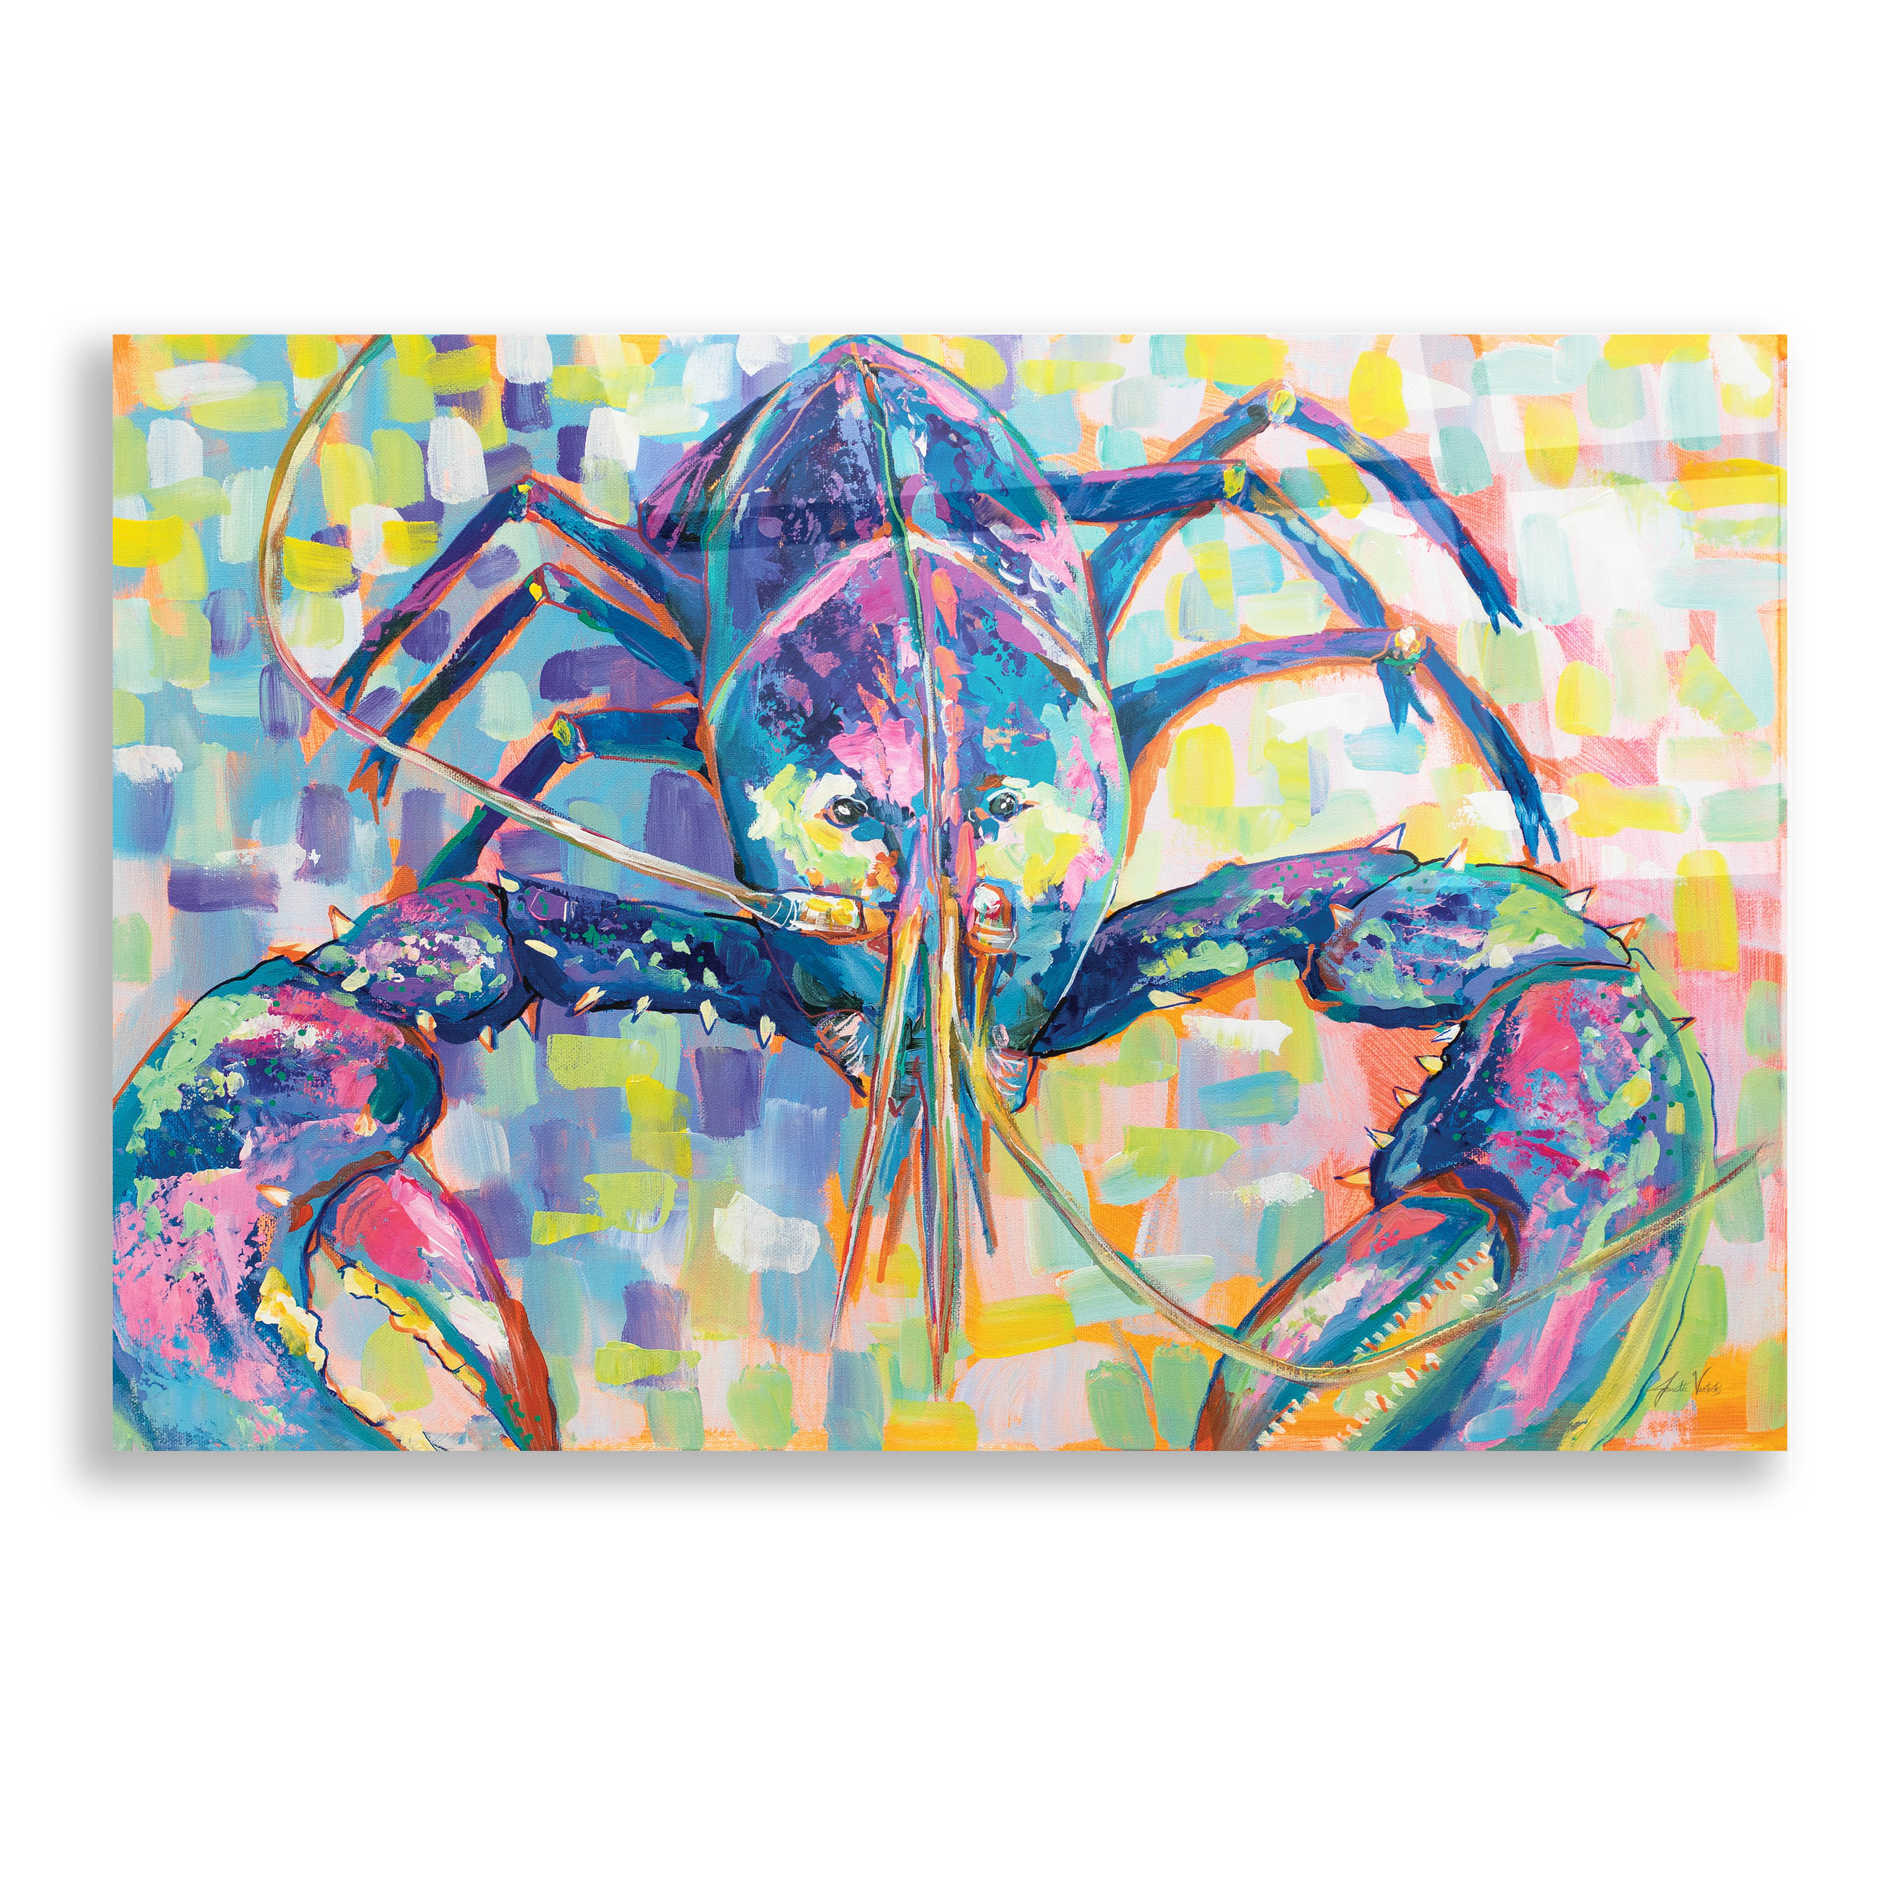 Epic Art 'Lilly Lobster II' by Jeanette Vertentes, Acrylic Glass Wall Art,16x12